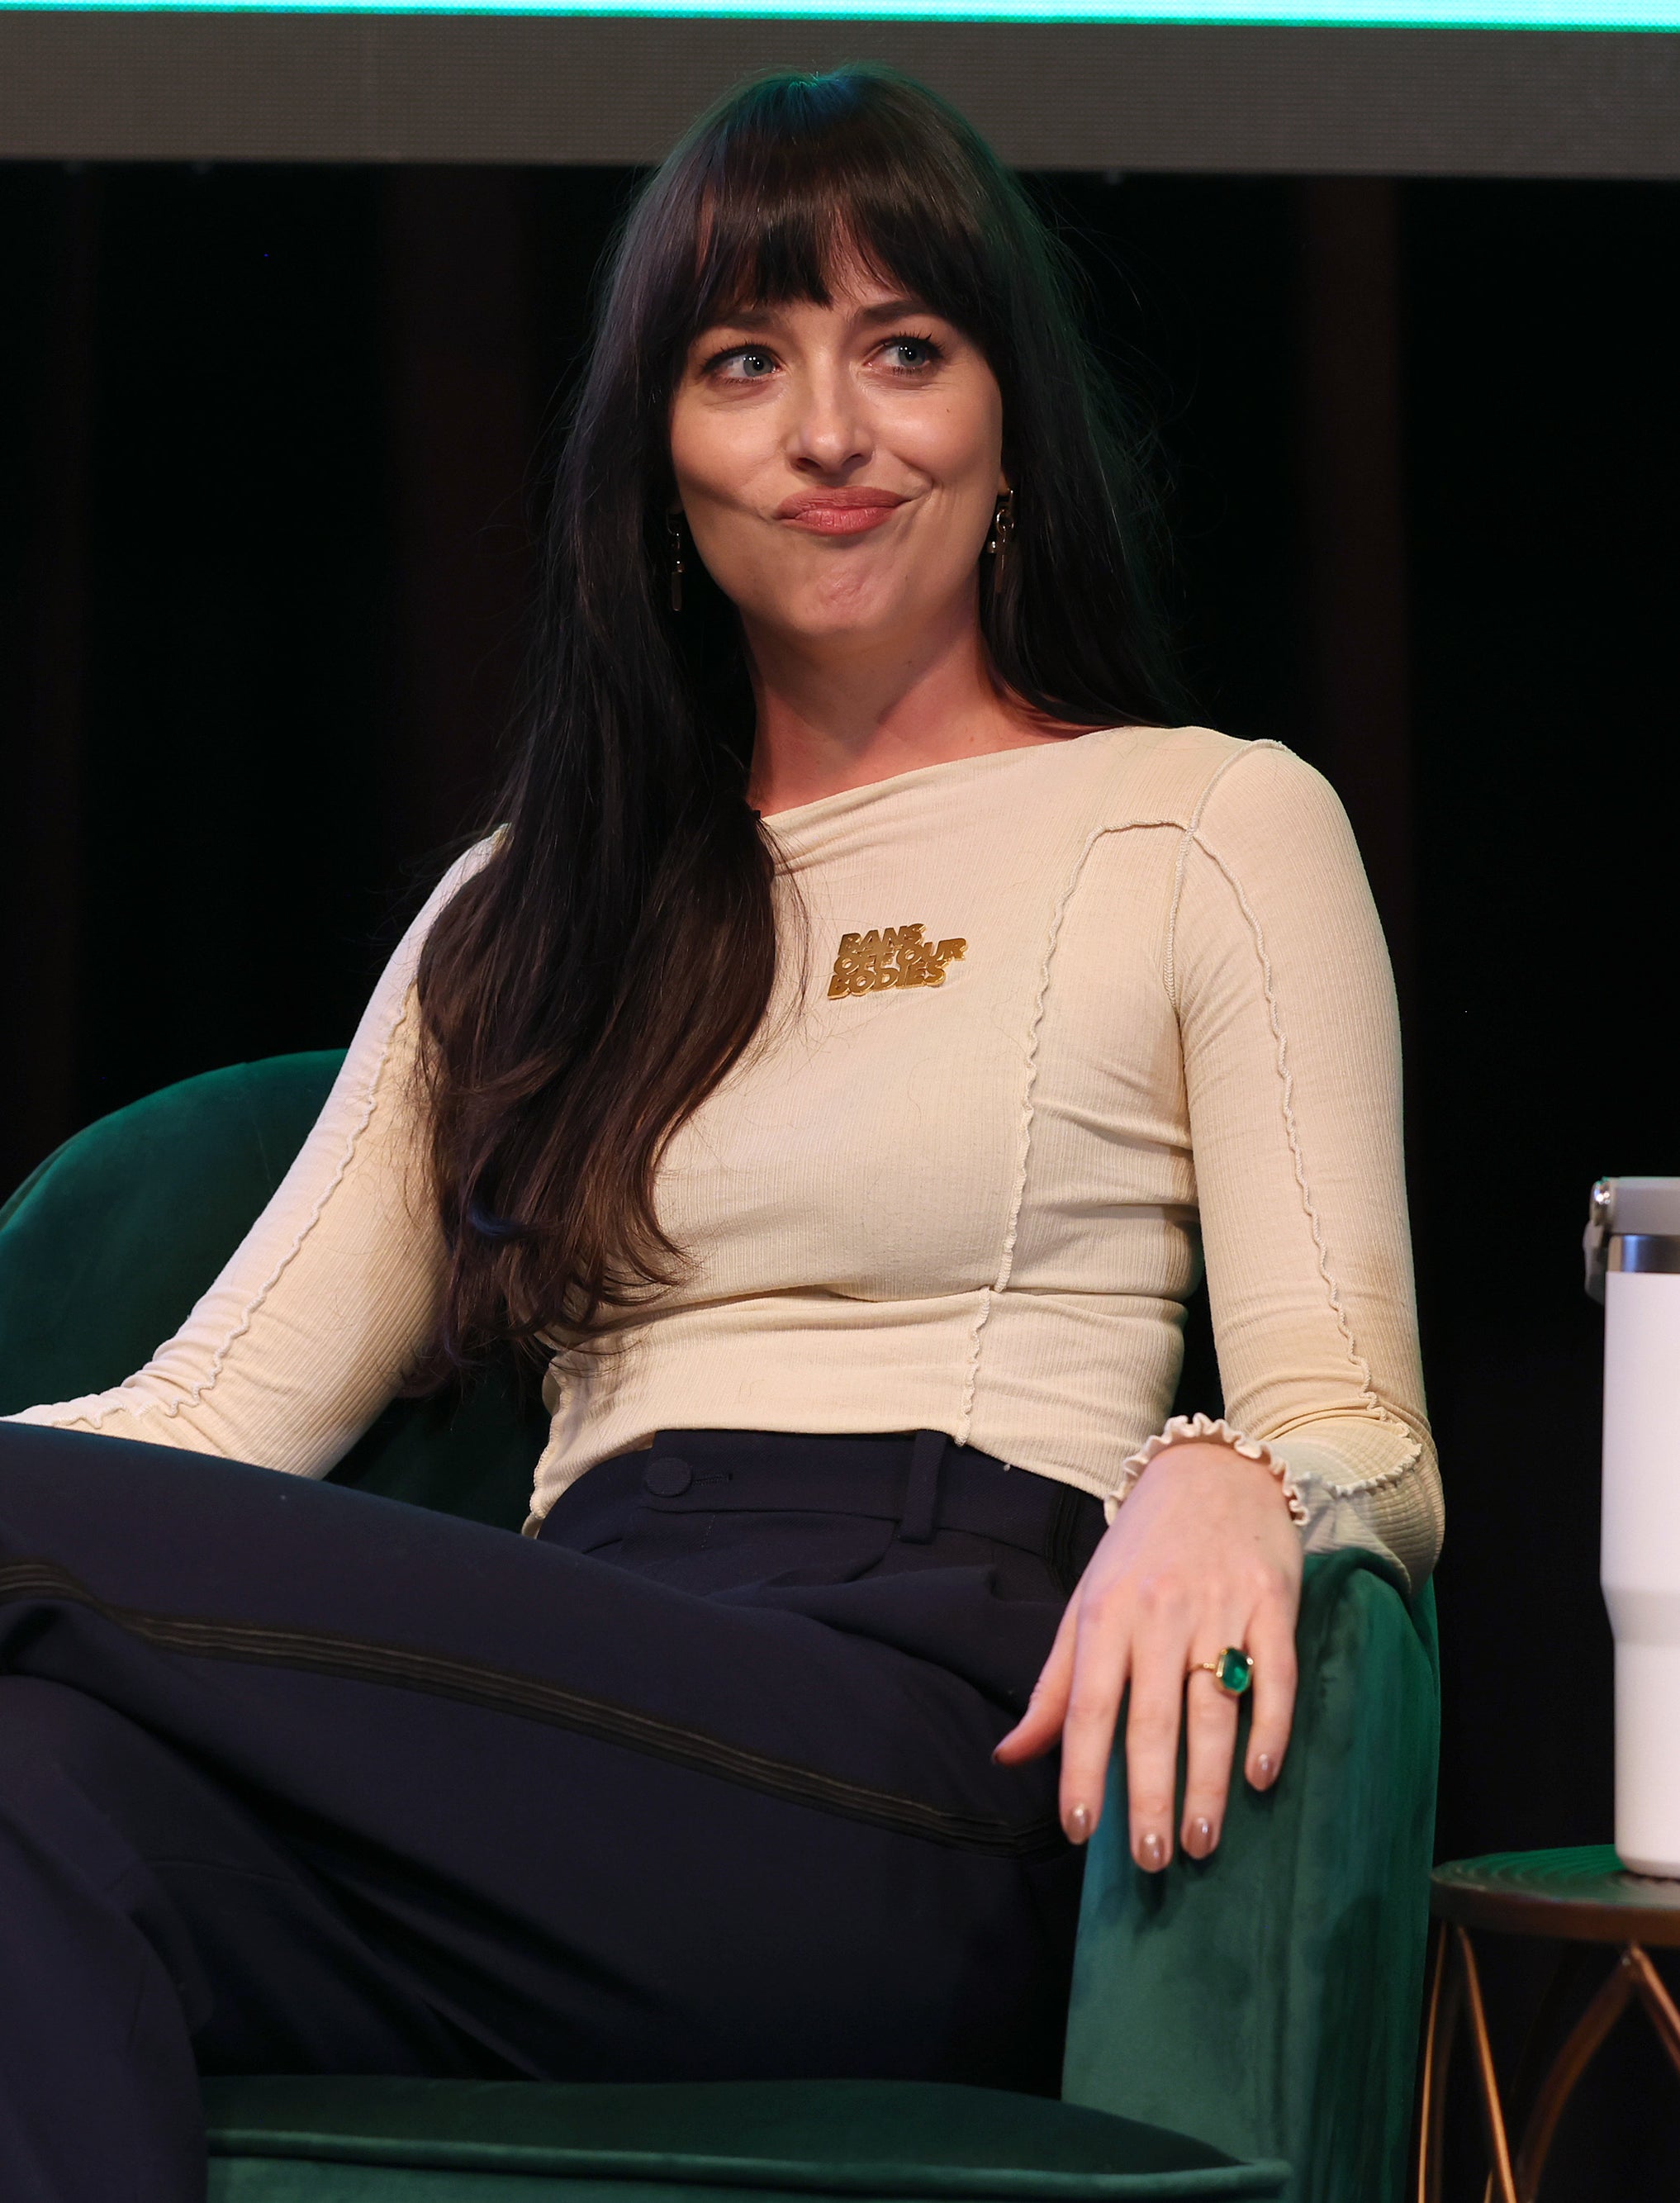 Woman seated on stage with a tumbler beside her, wearing a casual top and trousers